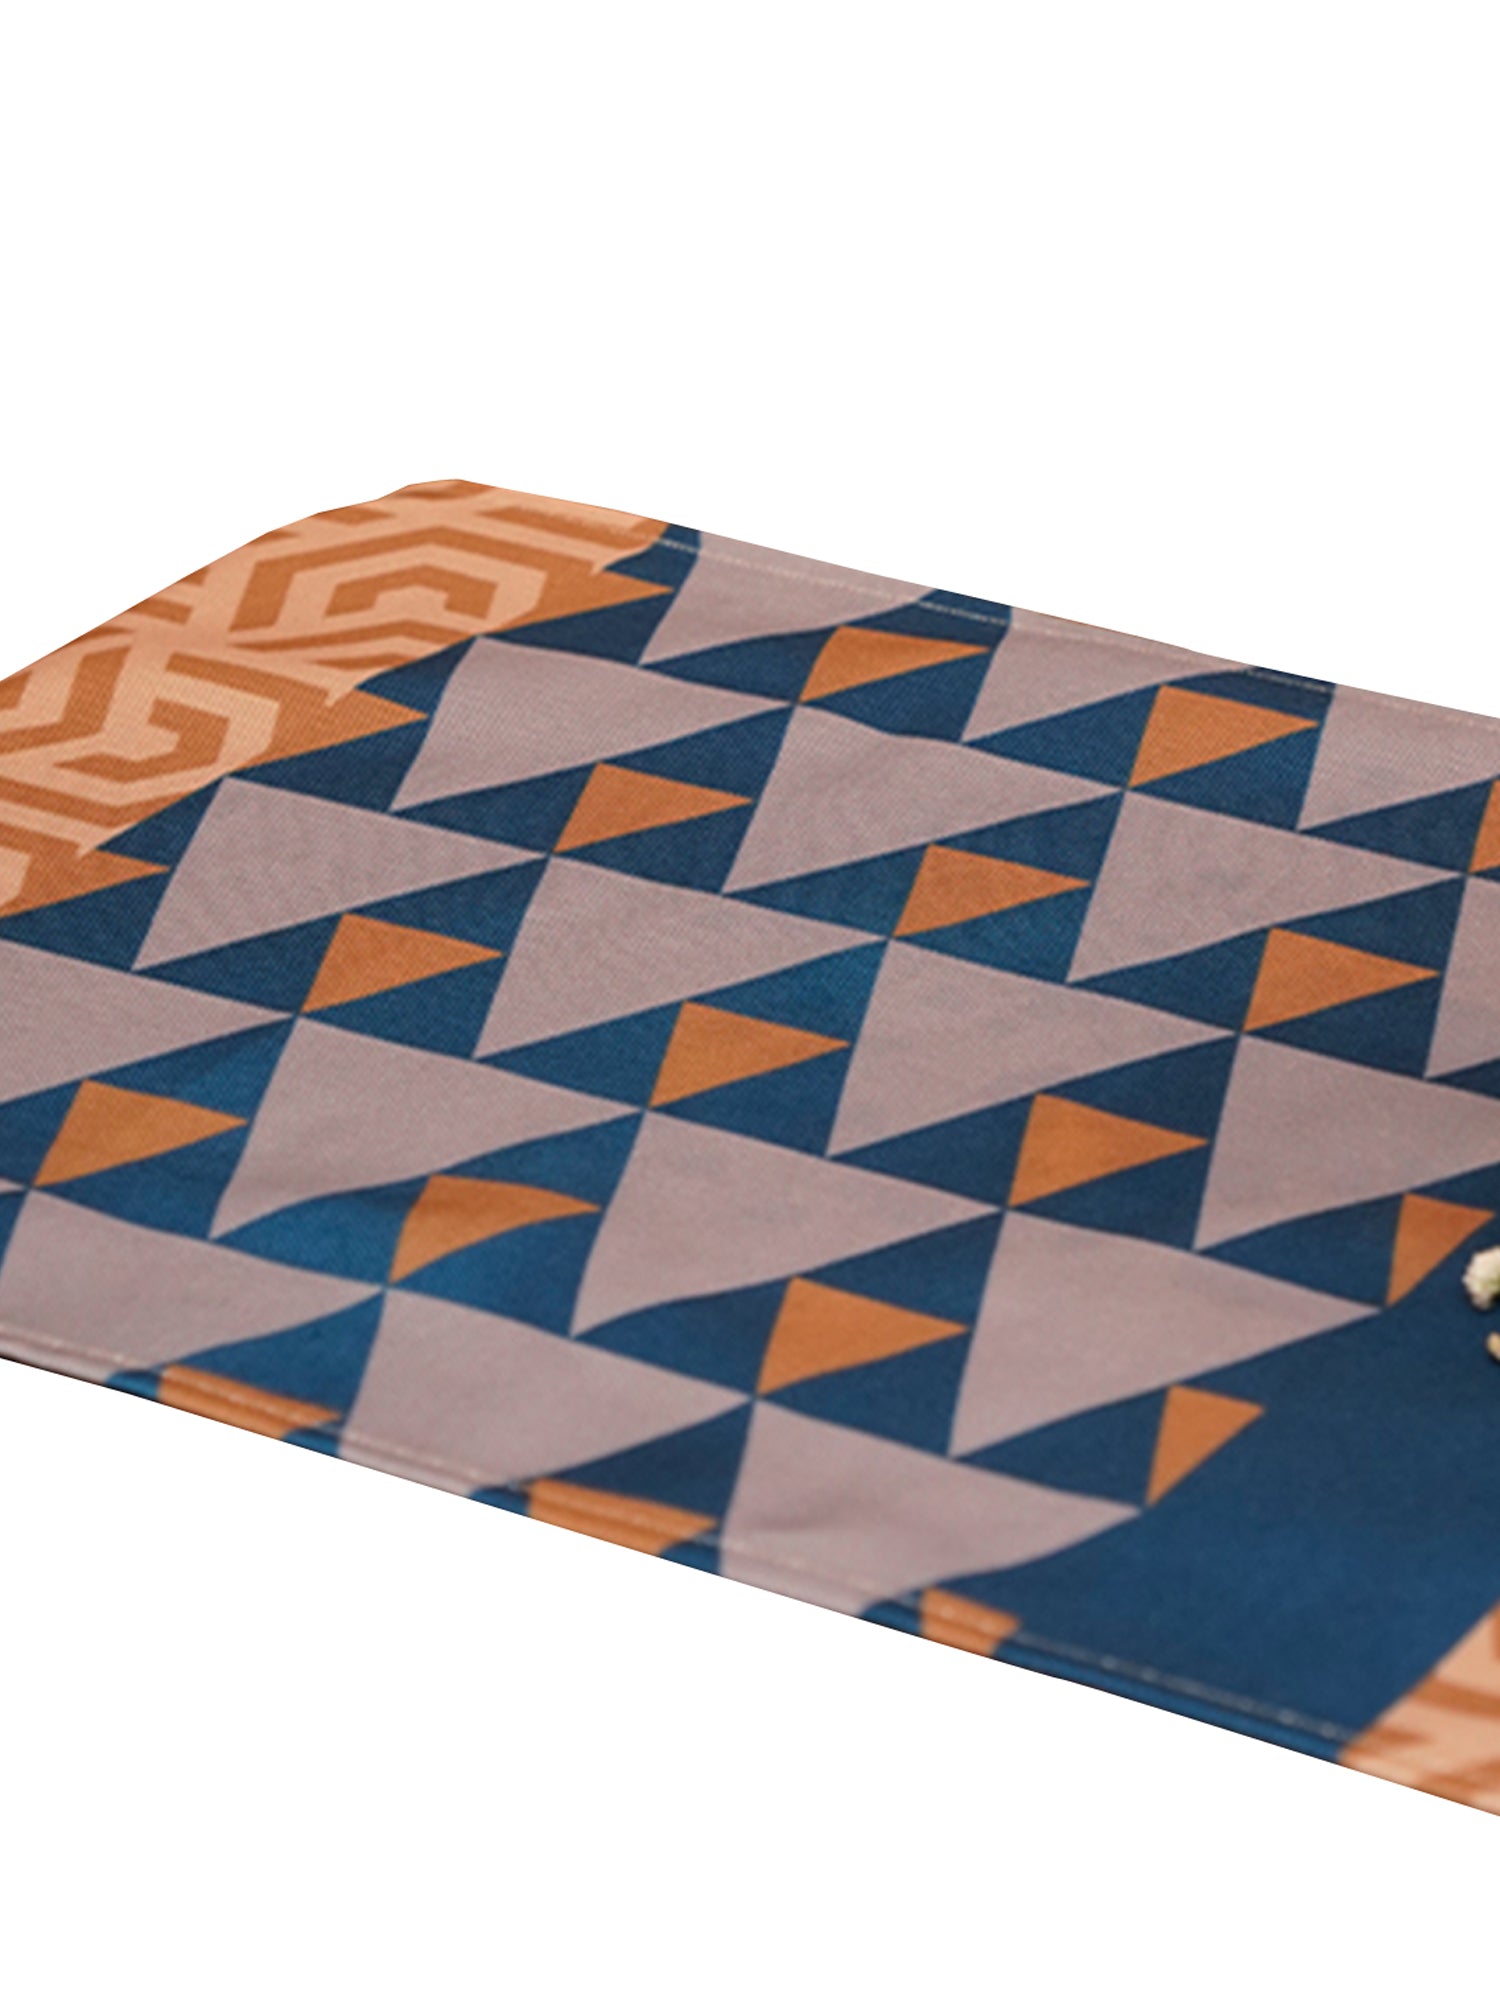 abstract printed table runner for 6 seater table - 52x84 inches.